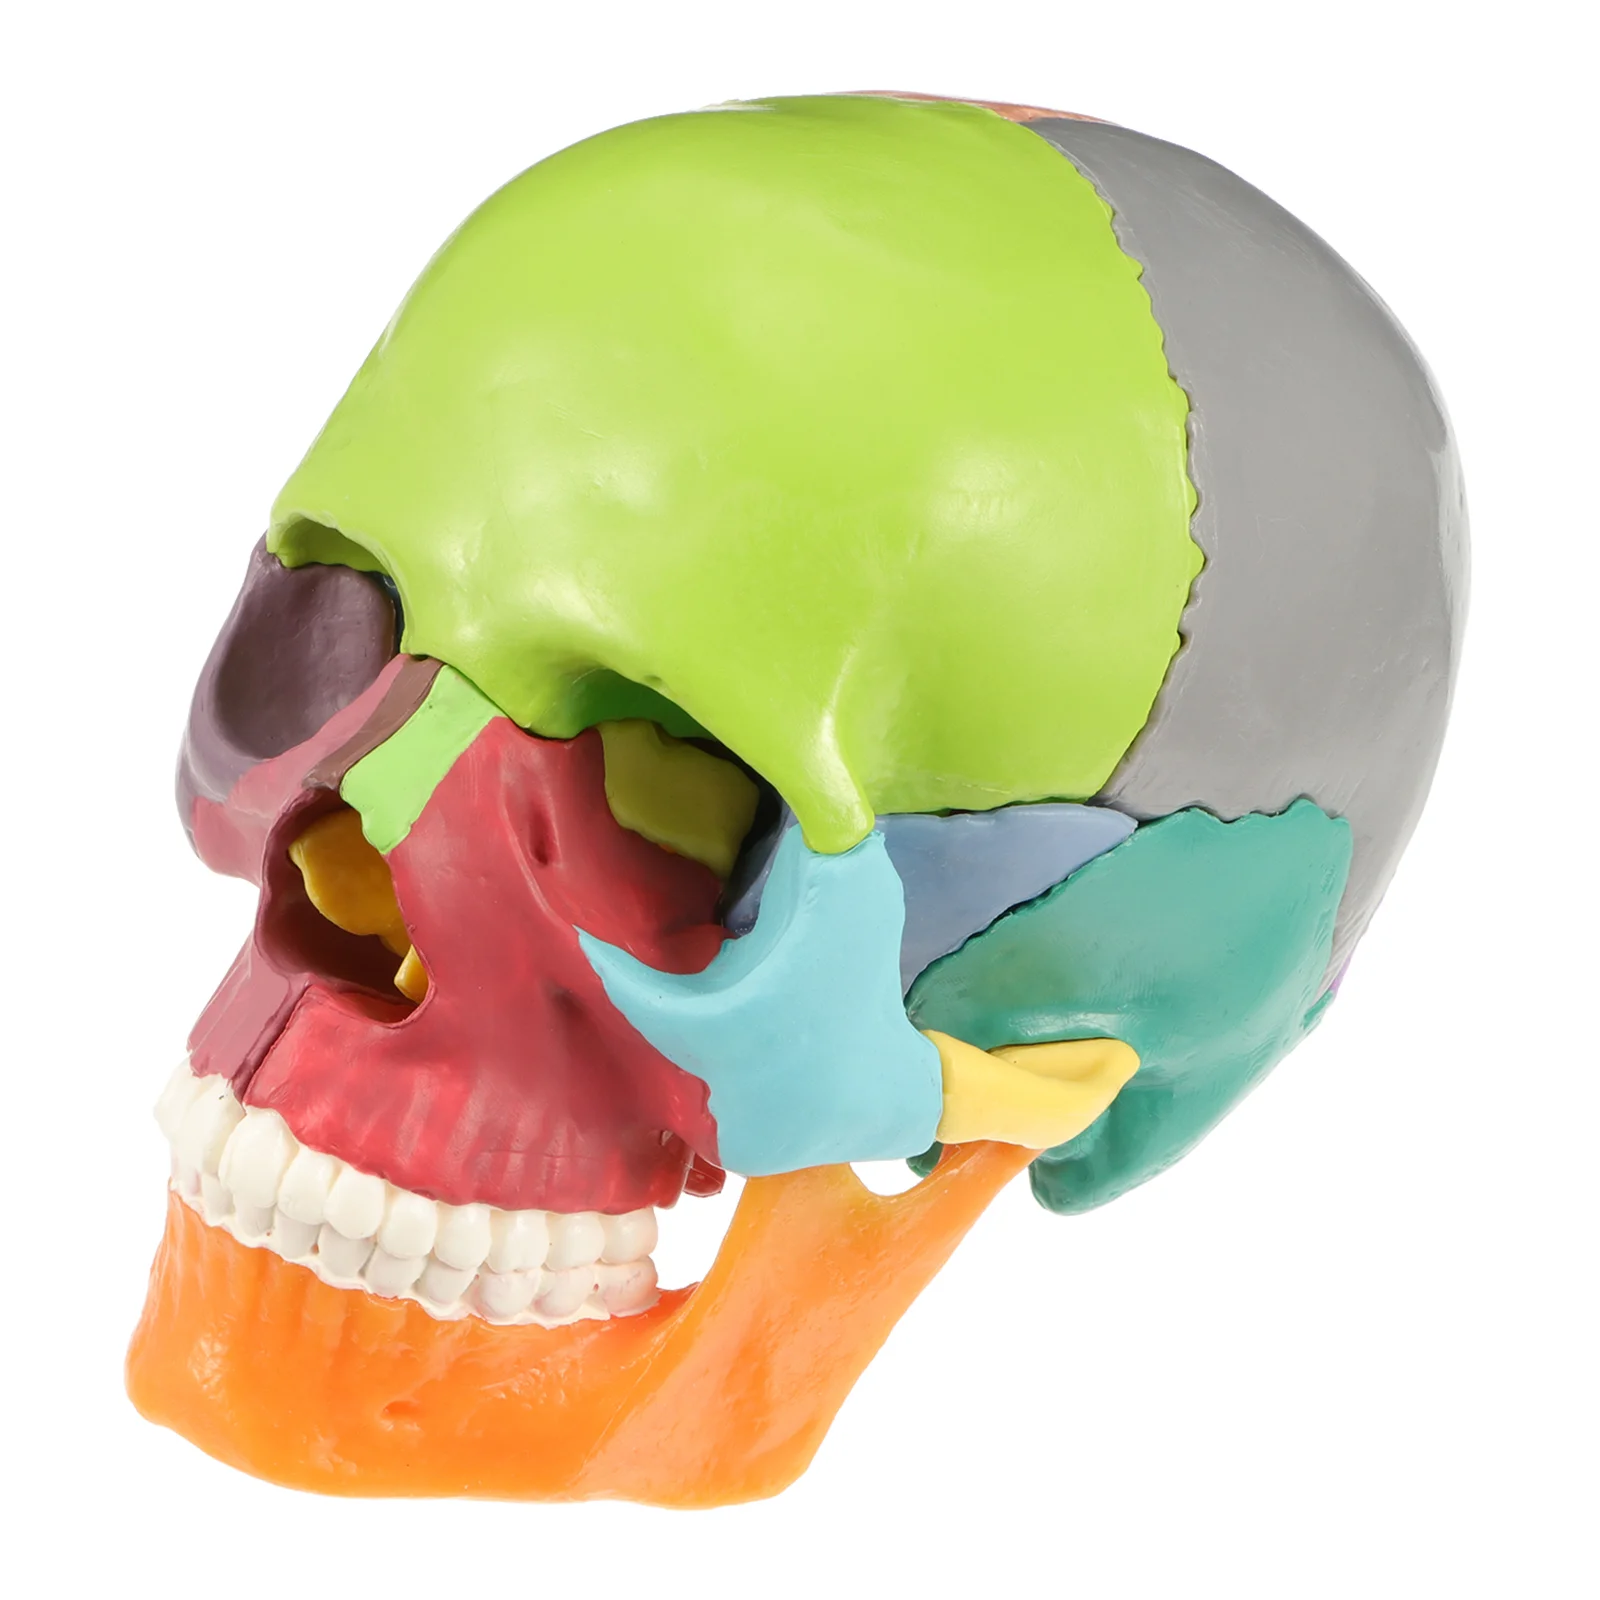 

1 Pc Color Model Anatomy Model Head Model Classroom Study Display Disarticulated